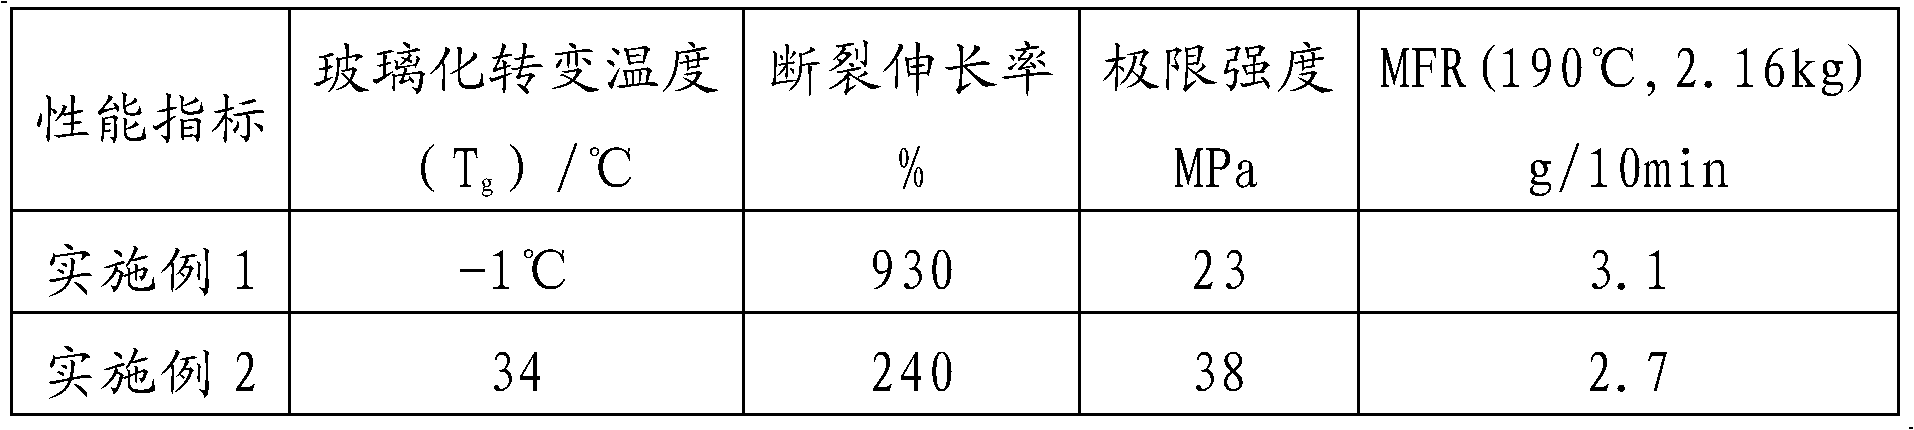 High-molecular-weight polyester plastic based on 2,3-butanediol and preparation method for same